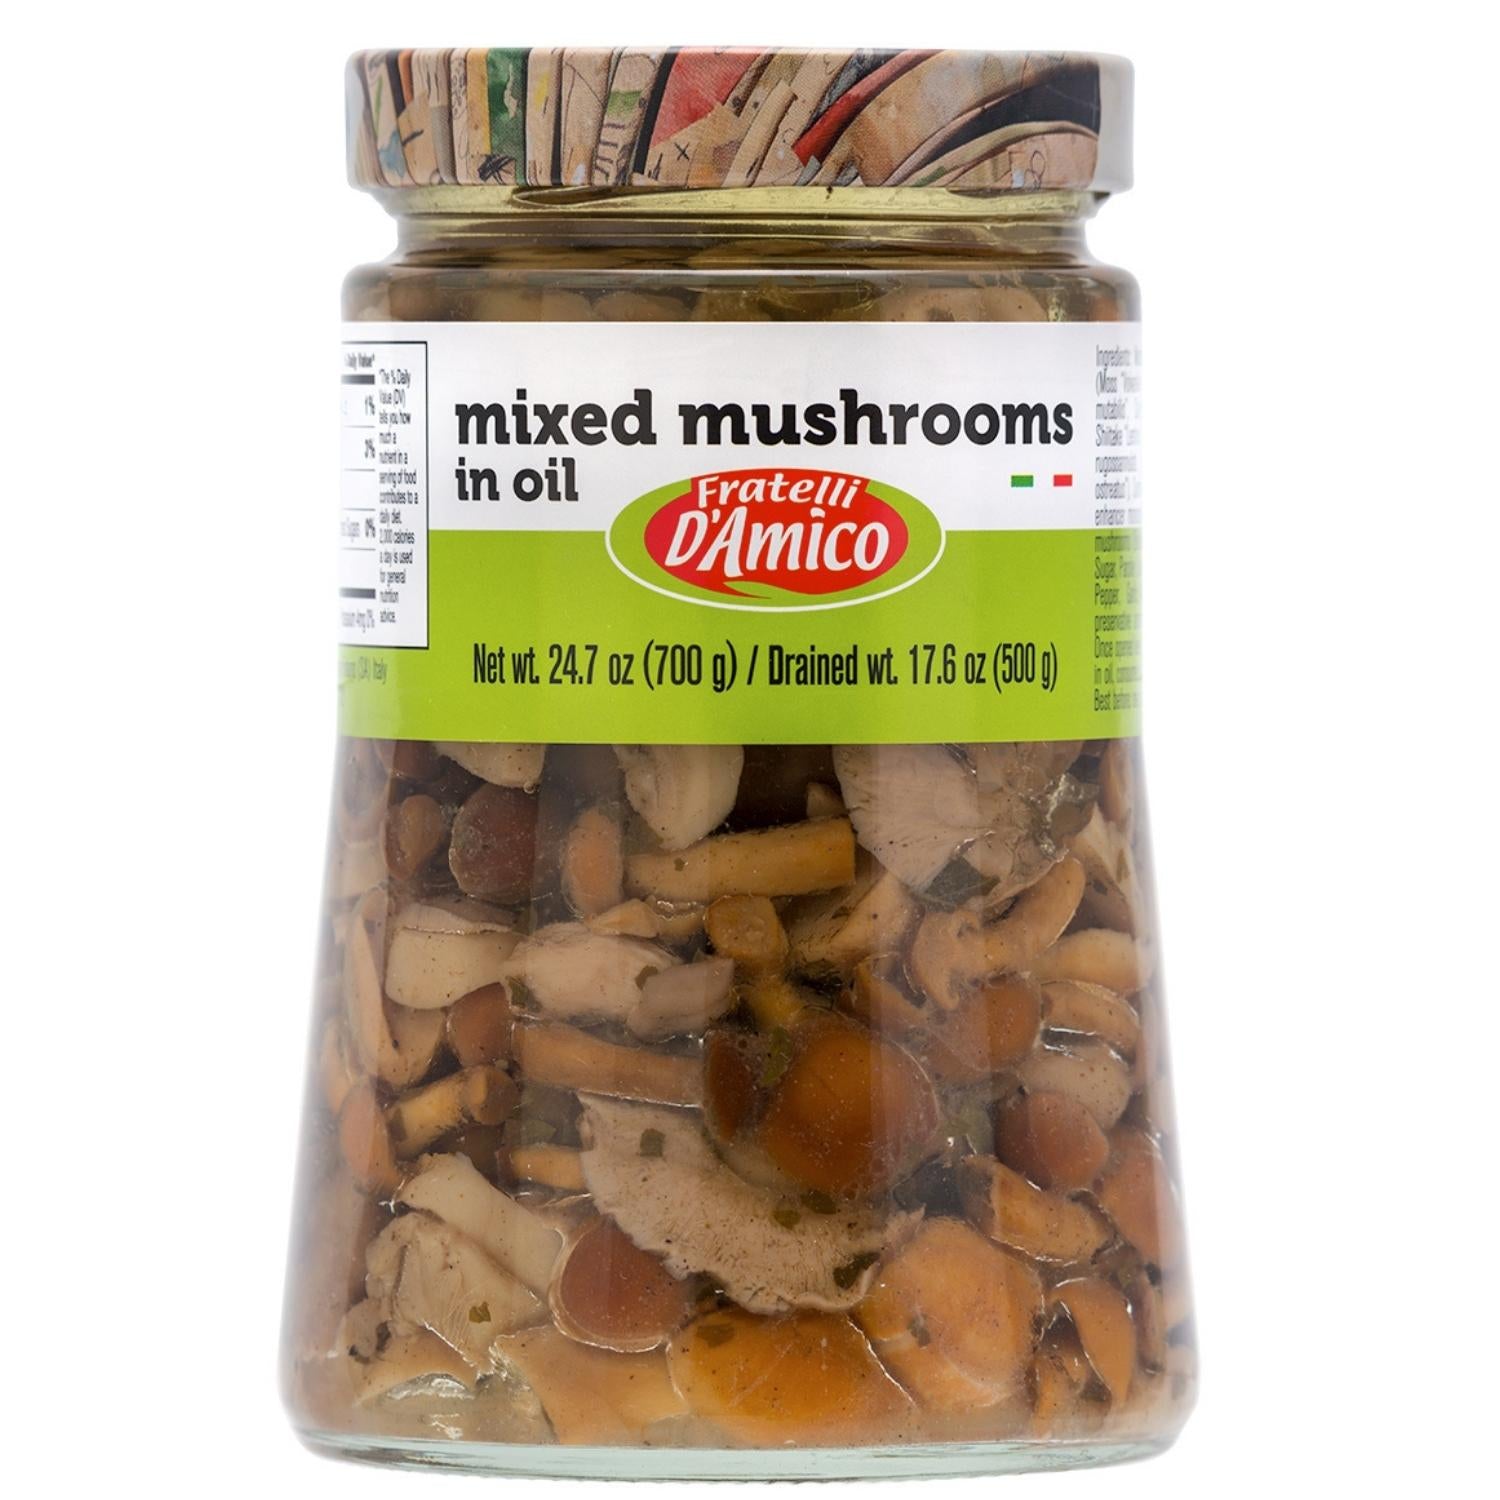 Fratelli D'Amico Mixed Mushrooms in oil, Family-Size